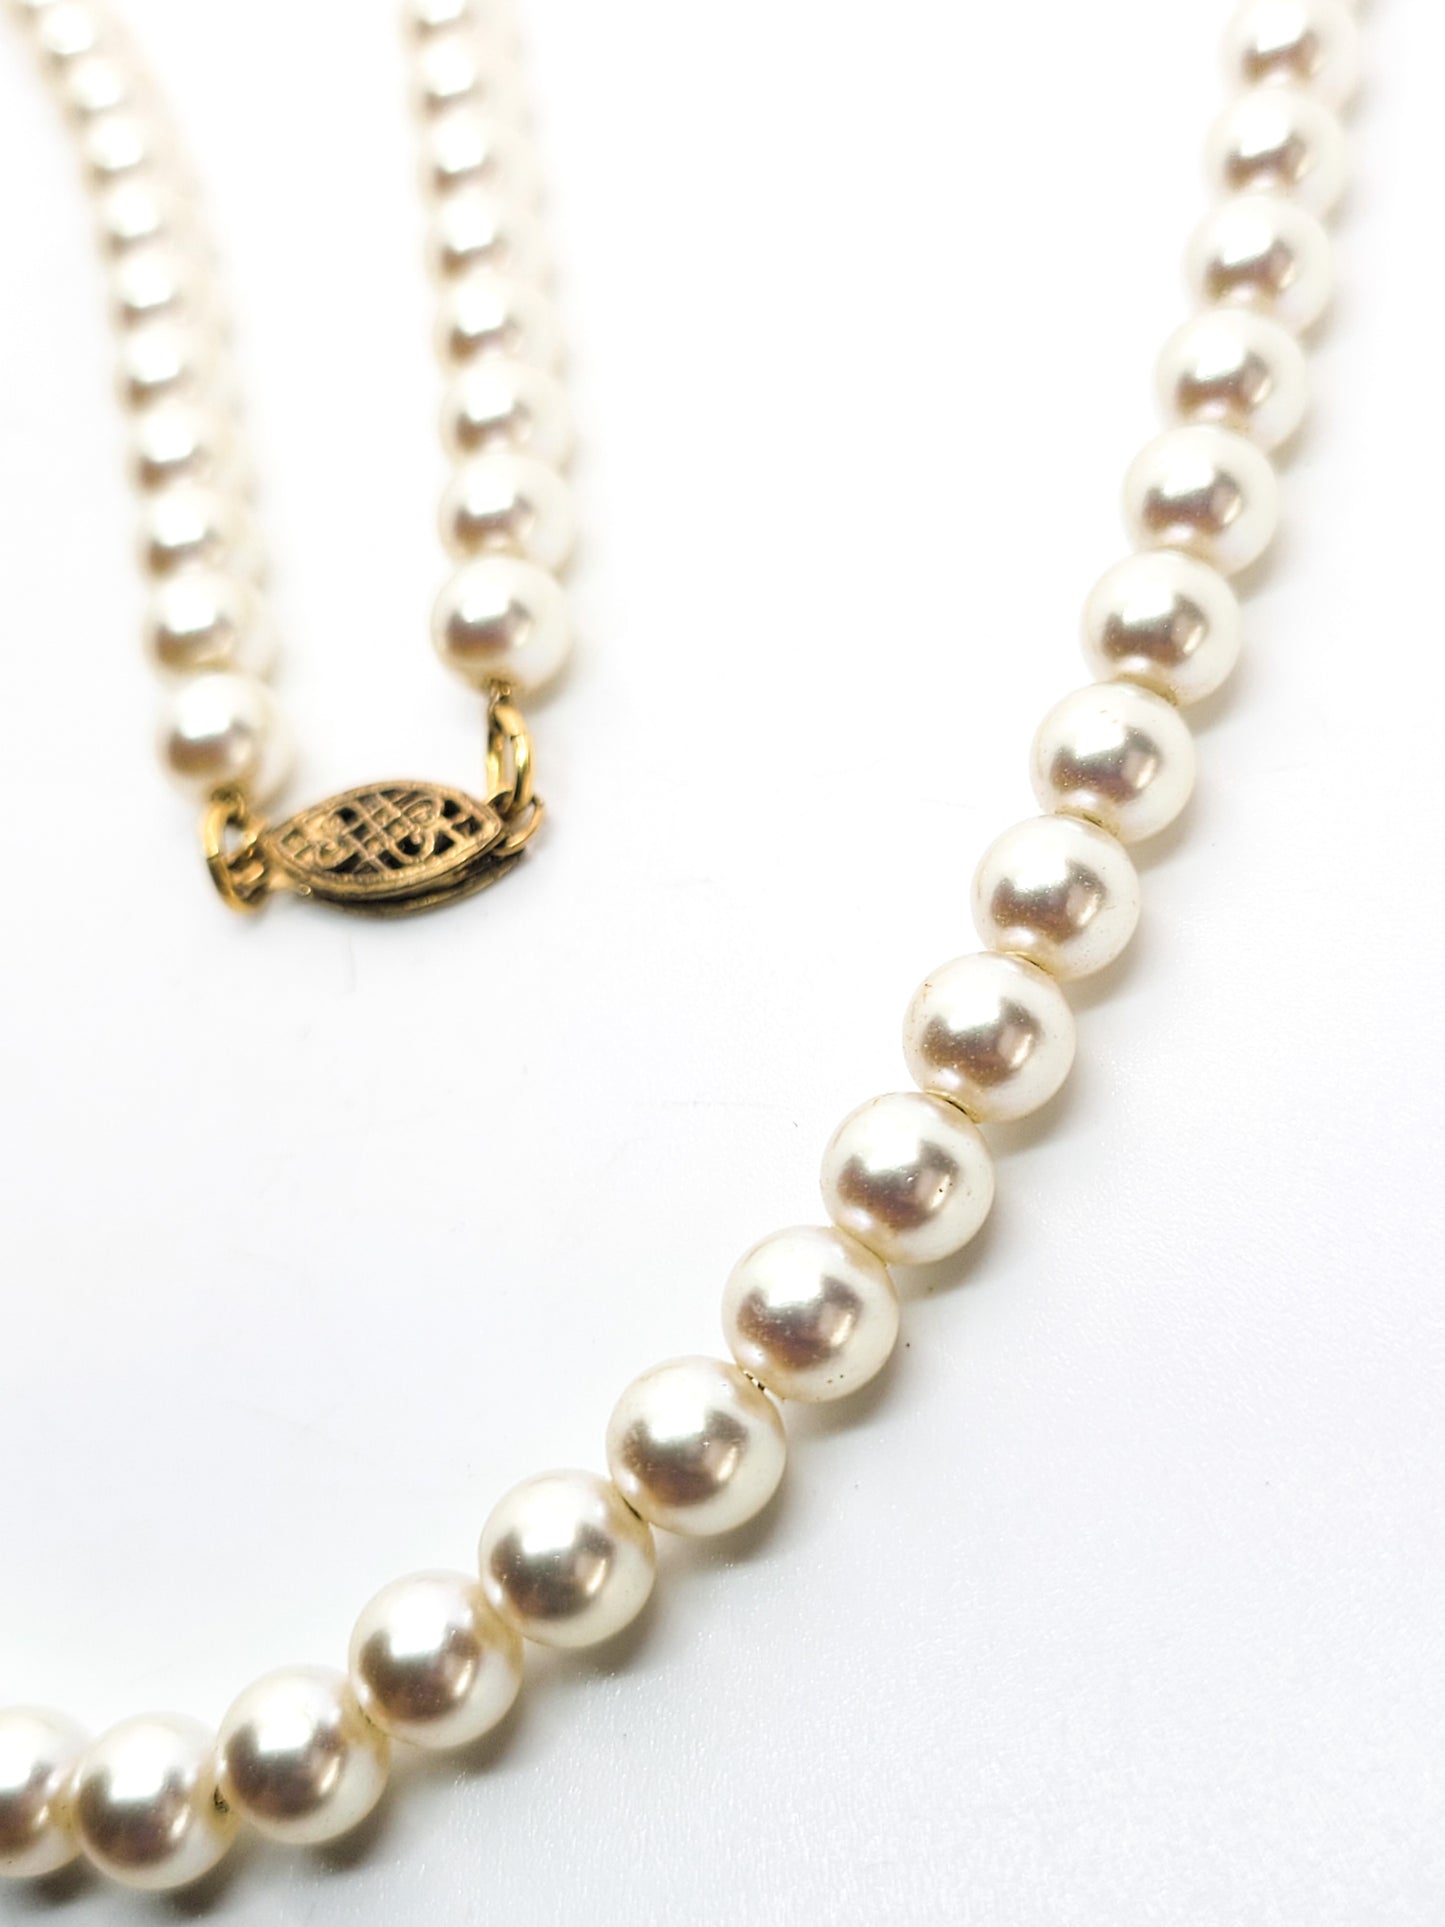 White 6mm faux pearl vintage necklace with sterling silver clasp mounted on chain